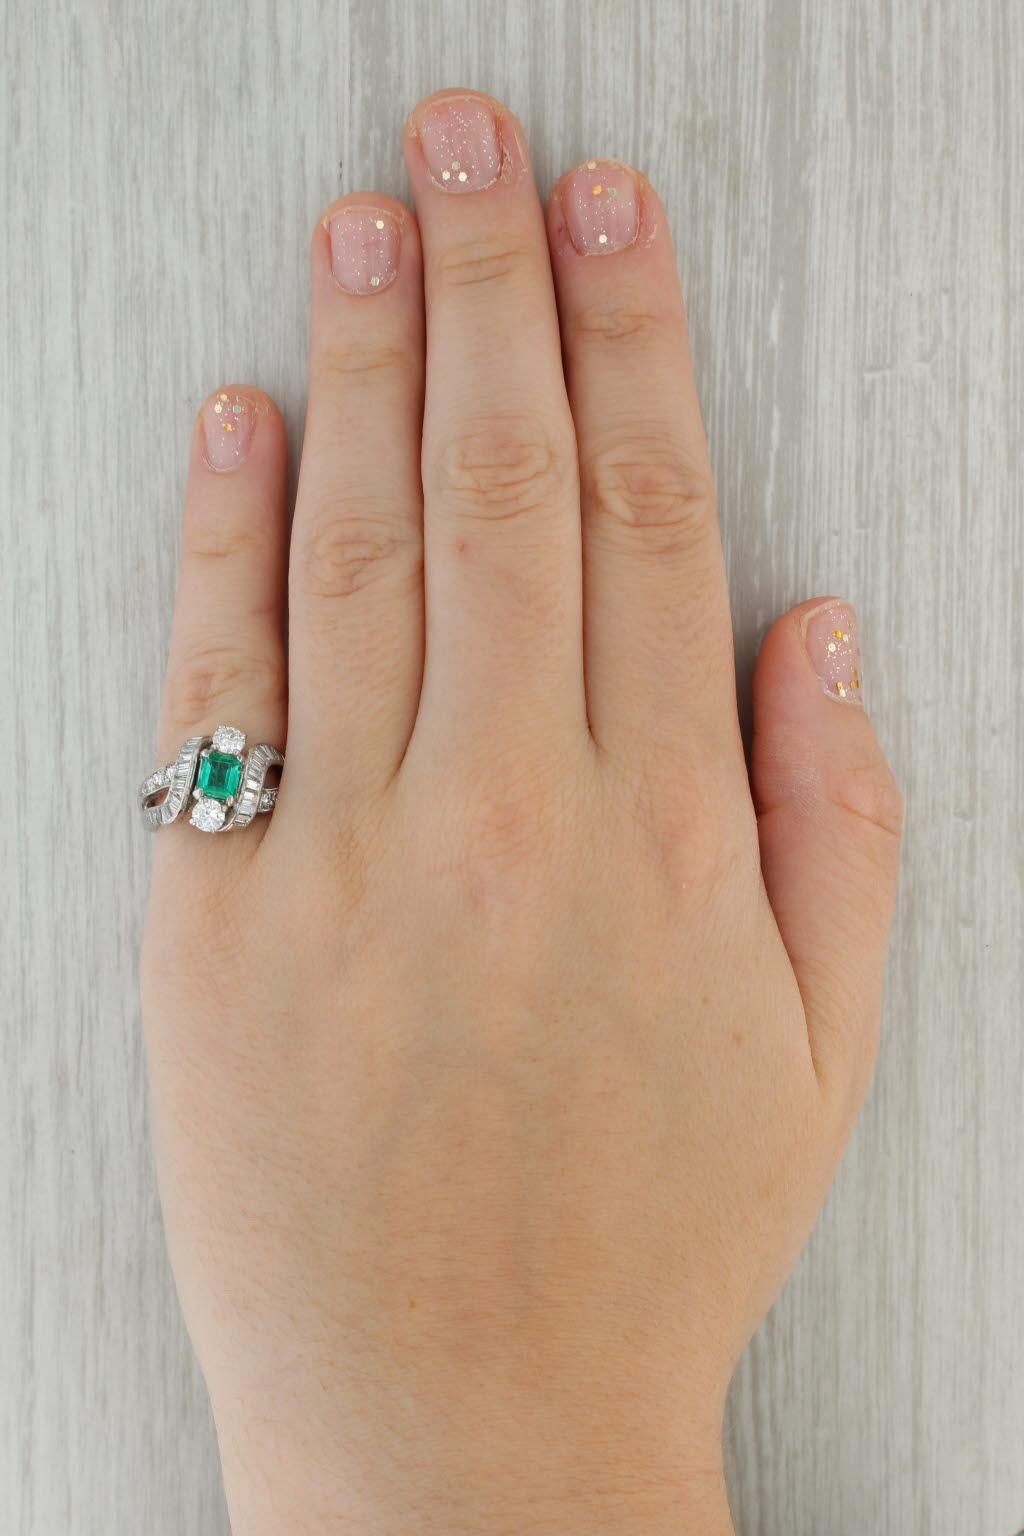 Vintage 1.94ctw Emerald Diamond Cocktail Ring 18k White Gold Size 5.75 For Sale 3